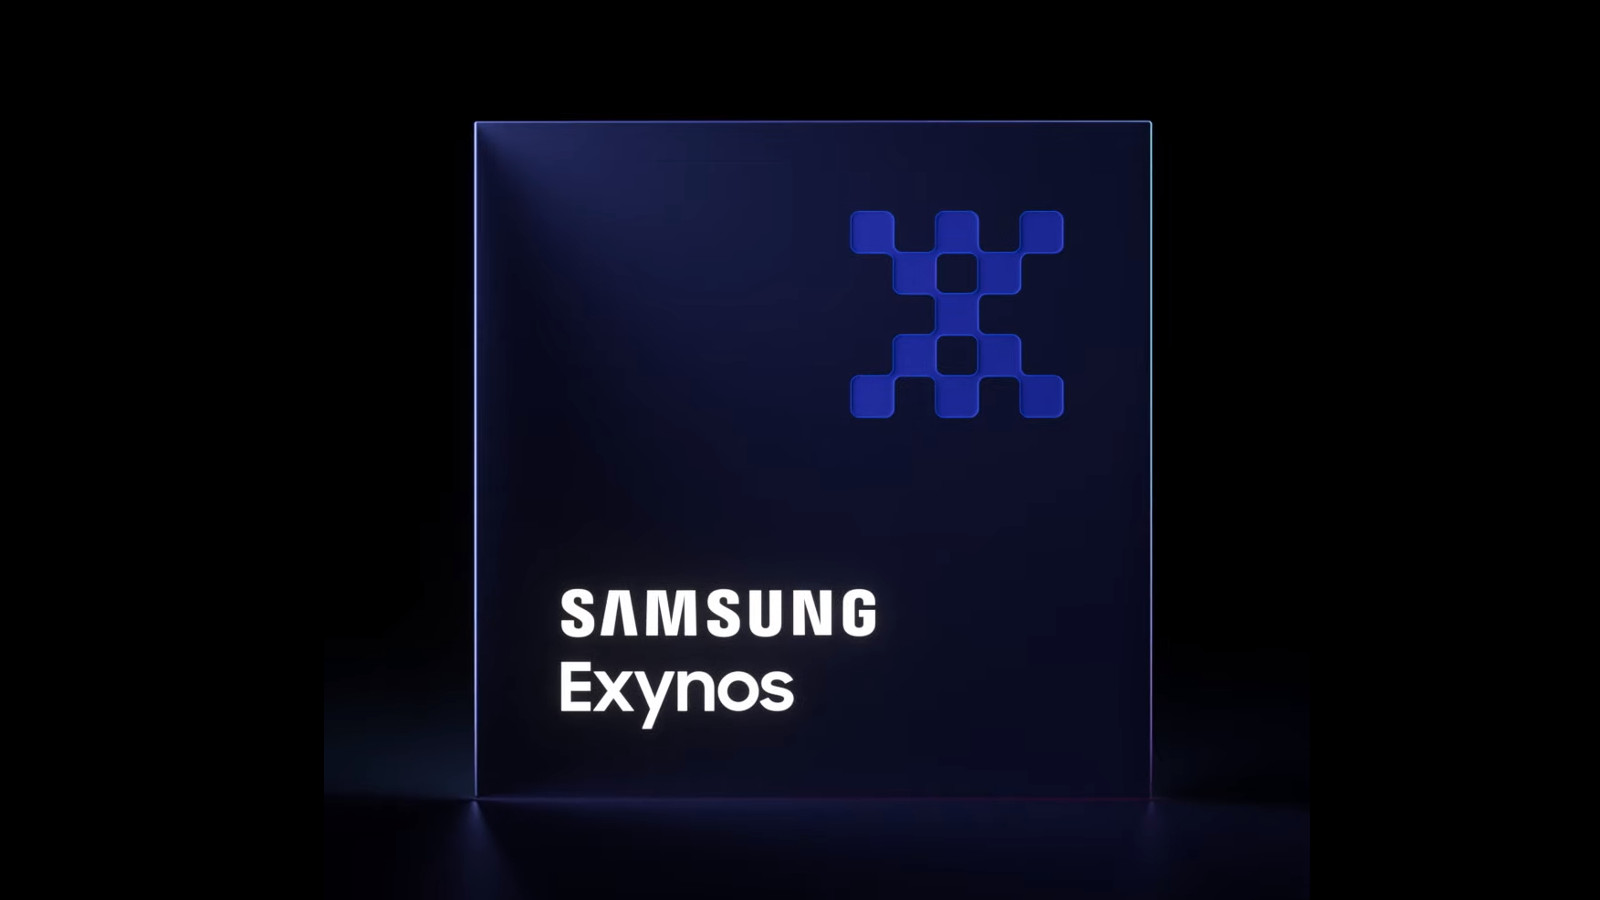 Meet the Exynos Interface U100, Samsung's Most memorable UWB Chipset